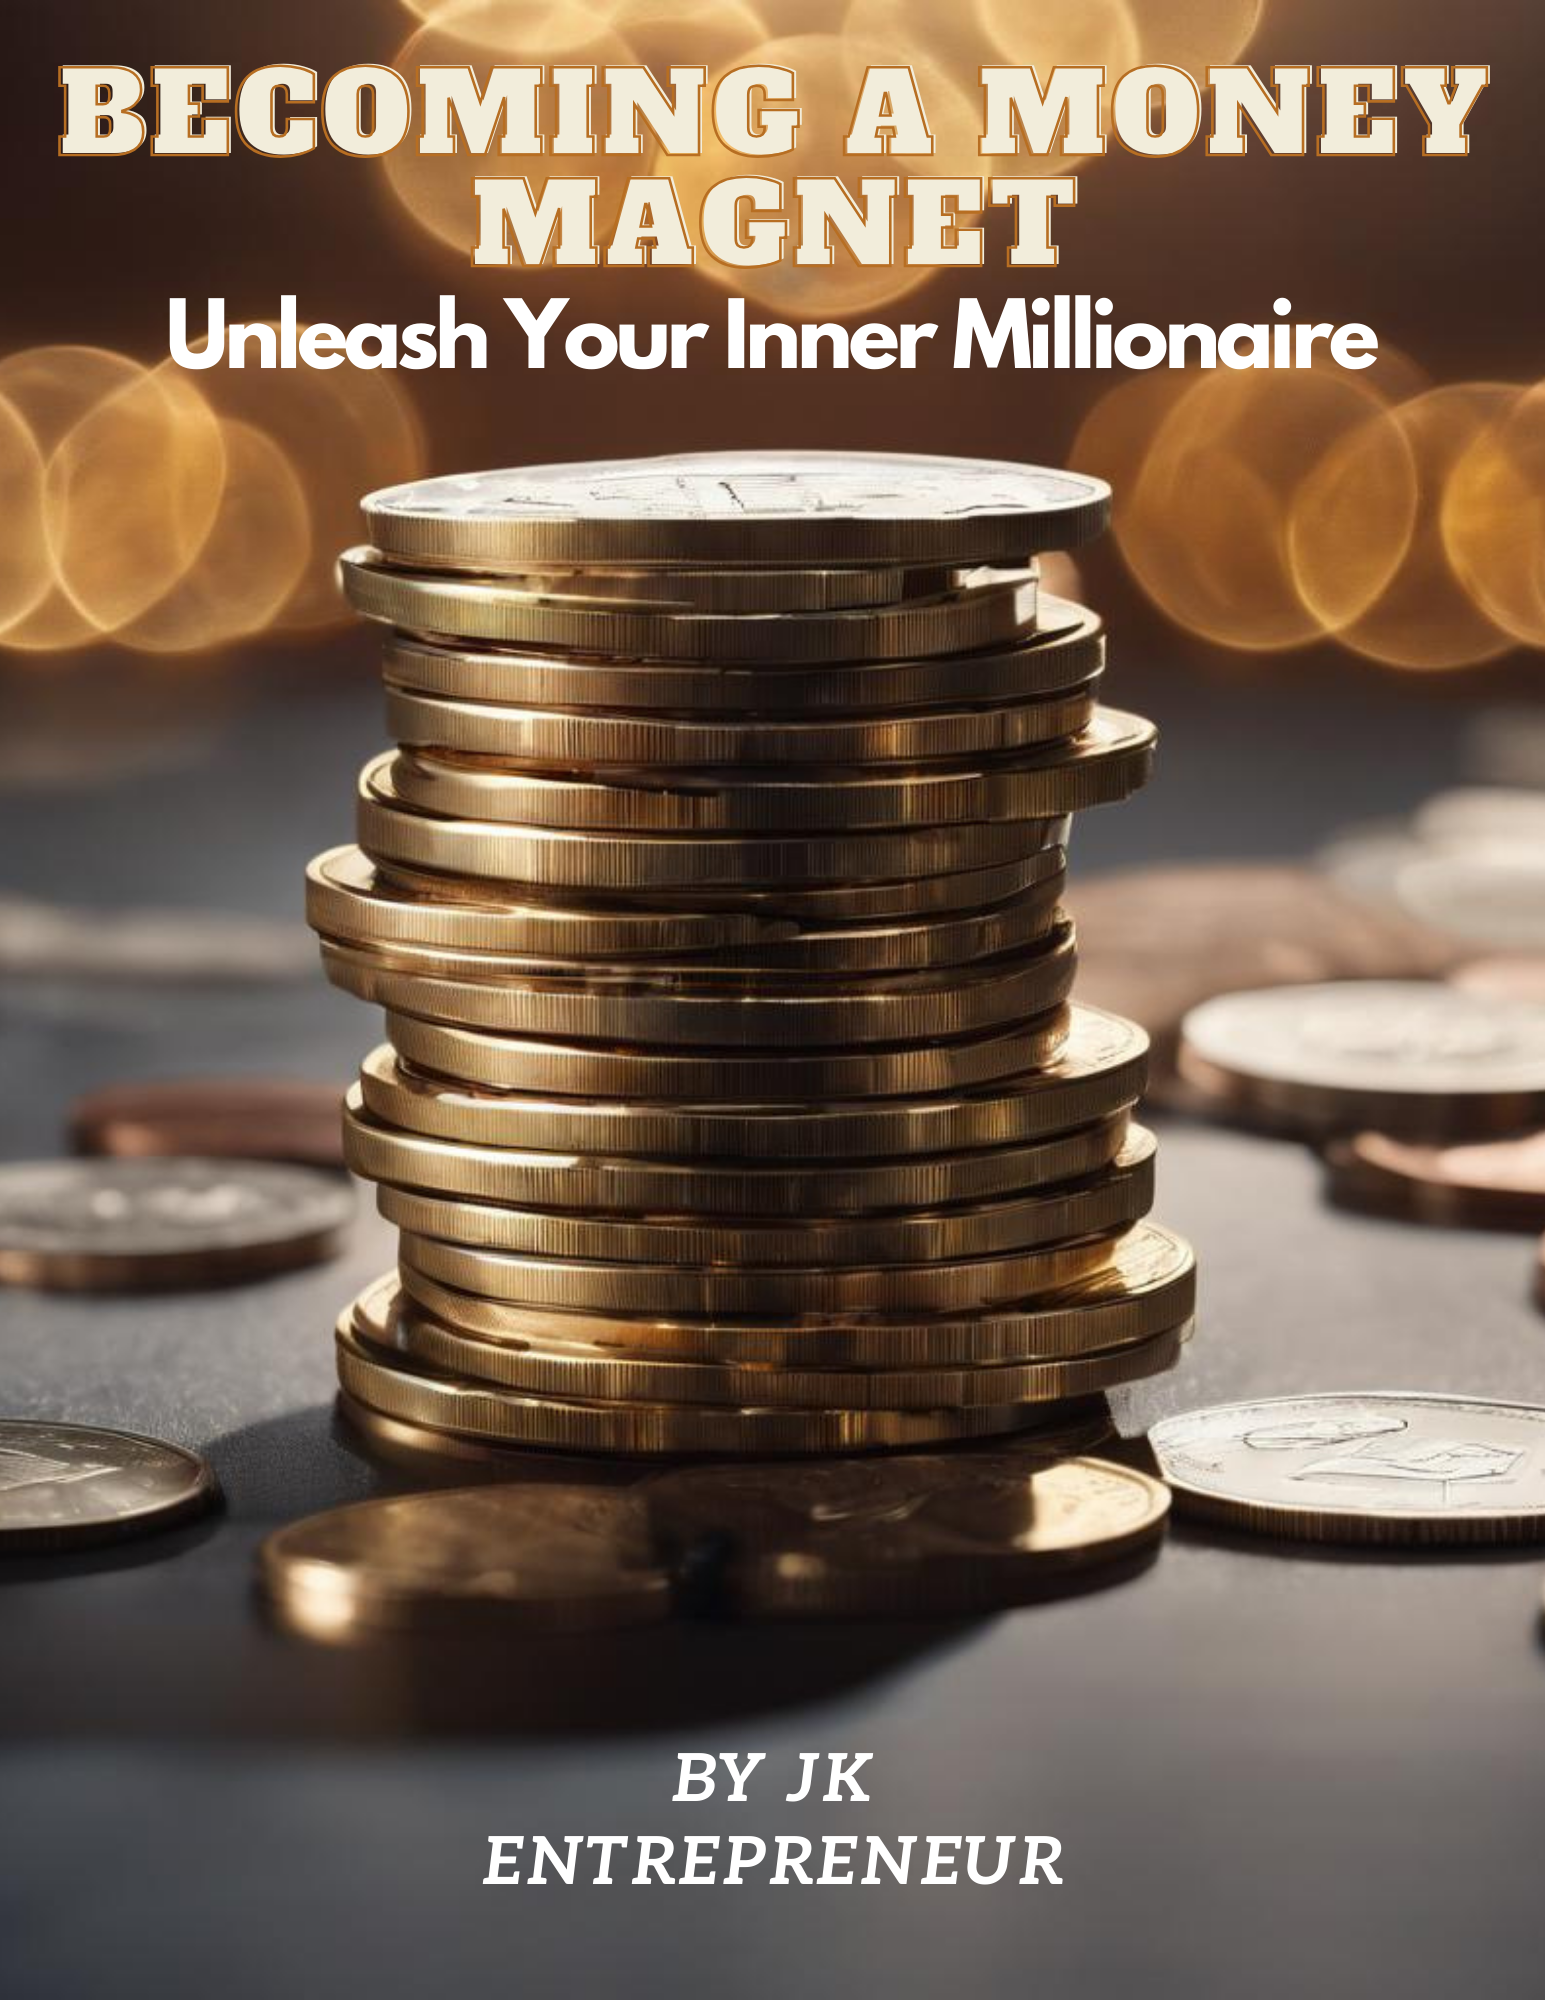 Ready to emulate Steve Jobs’ success? Our eBook, “Becoming a Money Magnet,” draws inspiration from his journey. It’s your guide to financial prosperity. Click here to purchase and start your success story today!